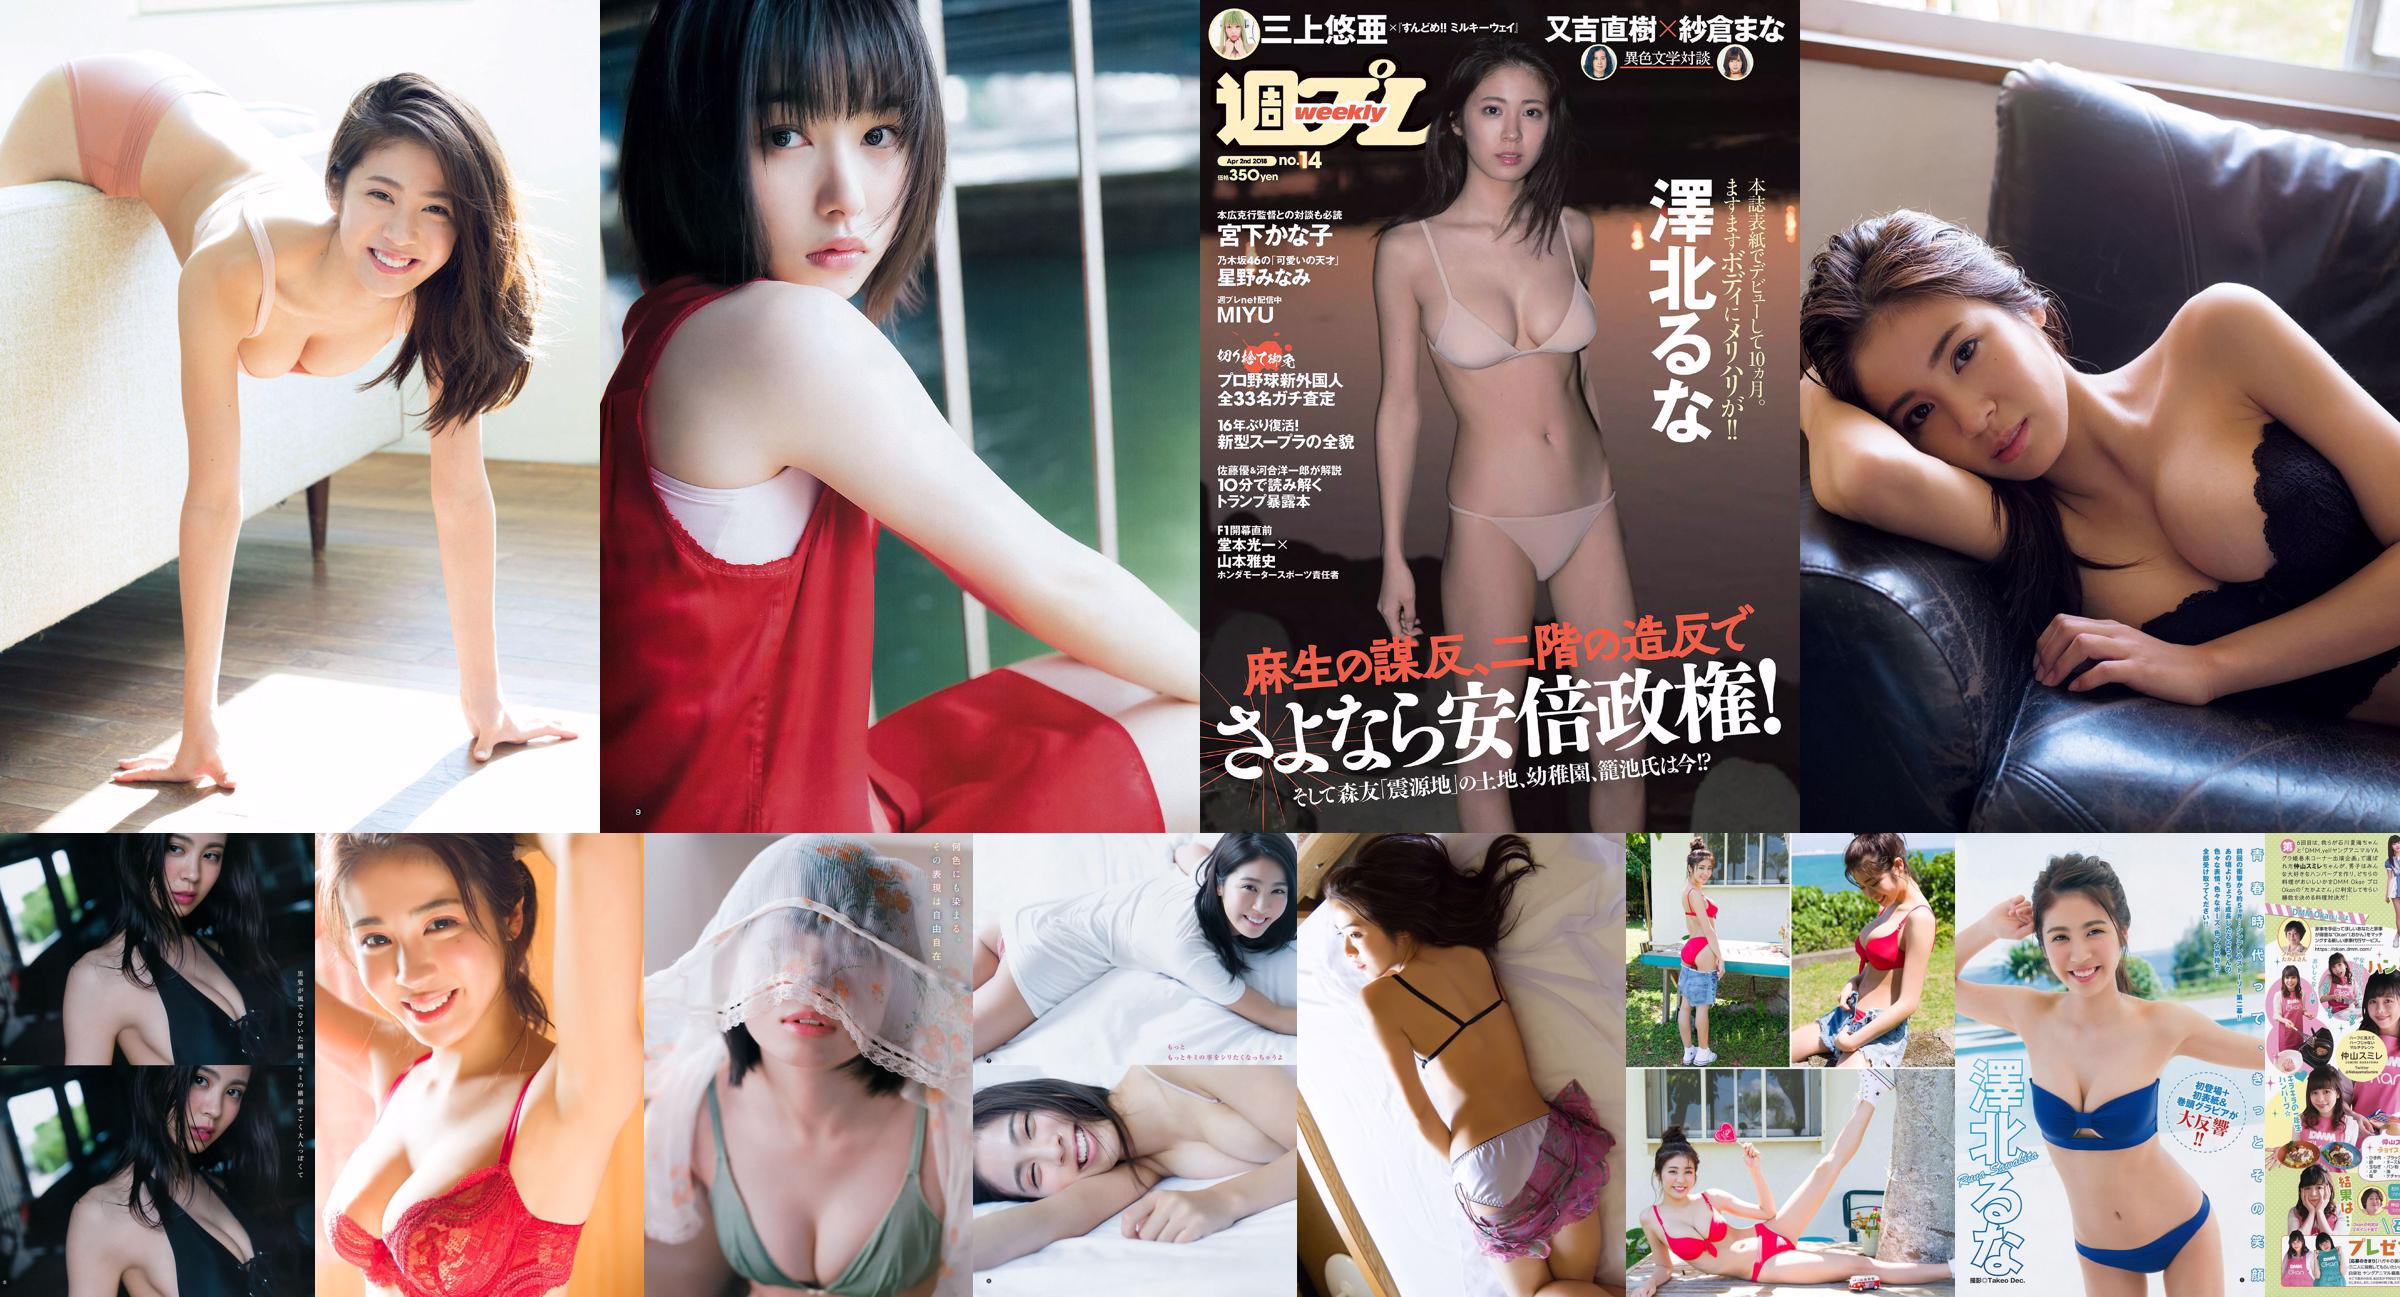 [FRIDAY] Luna Sawakita << "Beauty bust spills!" A little naughty sea camp (with video) >> Photo No.5e4ff8 Page 3